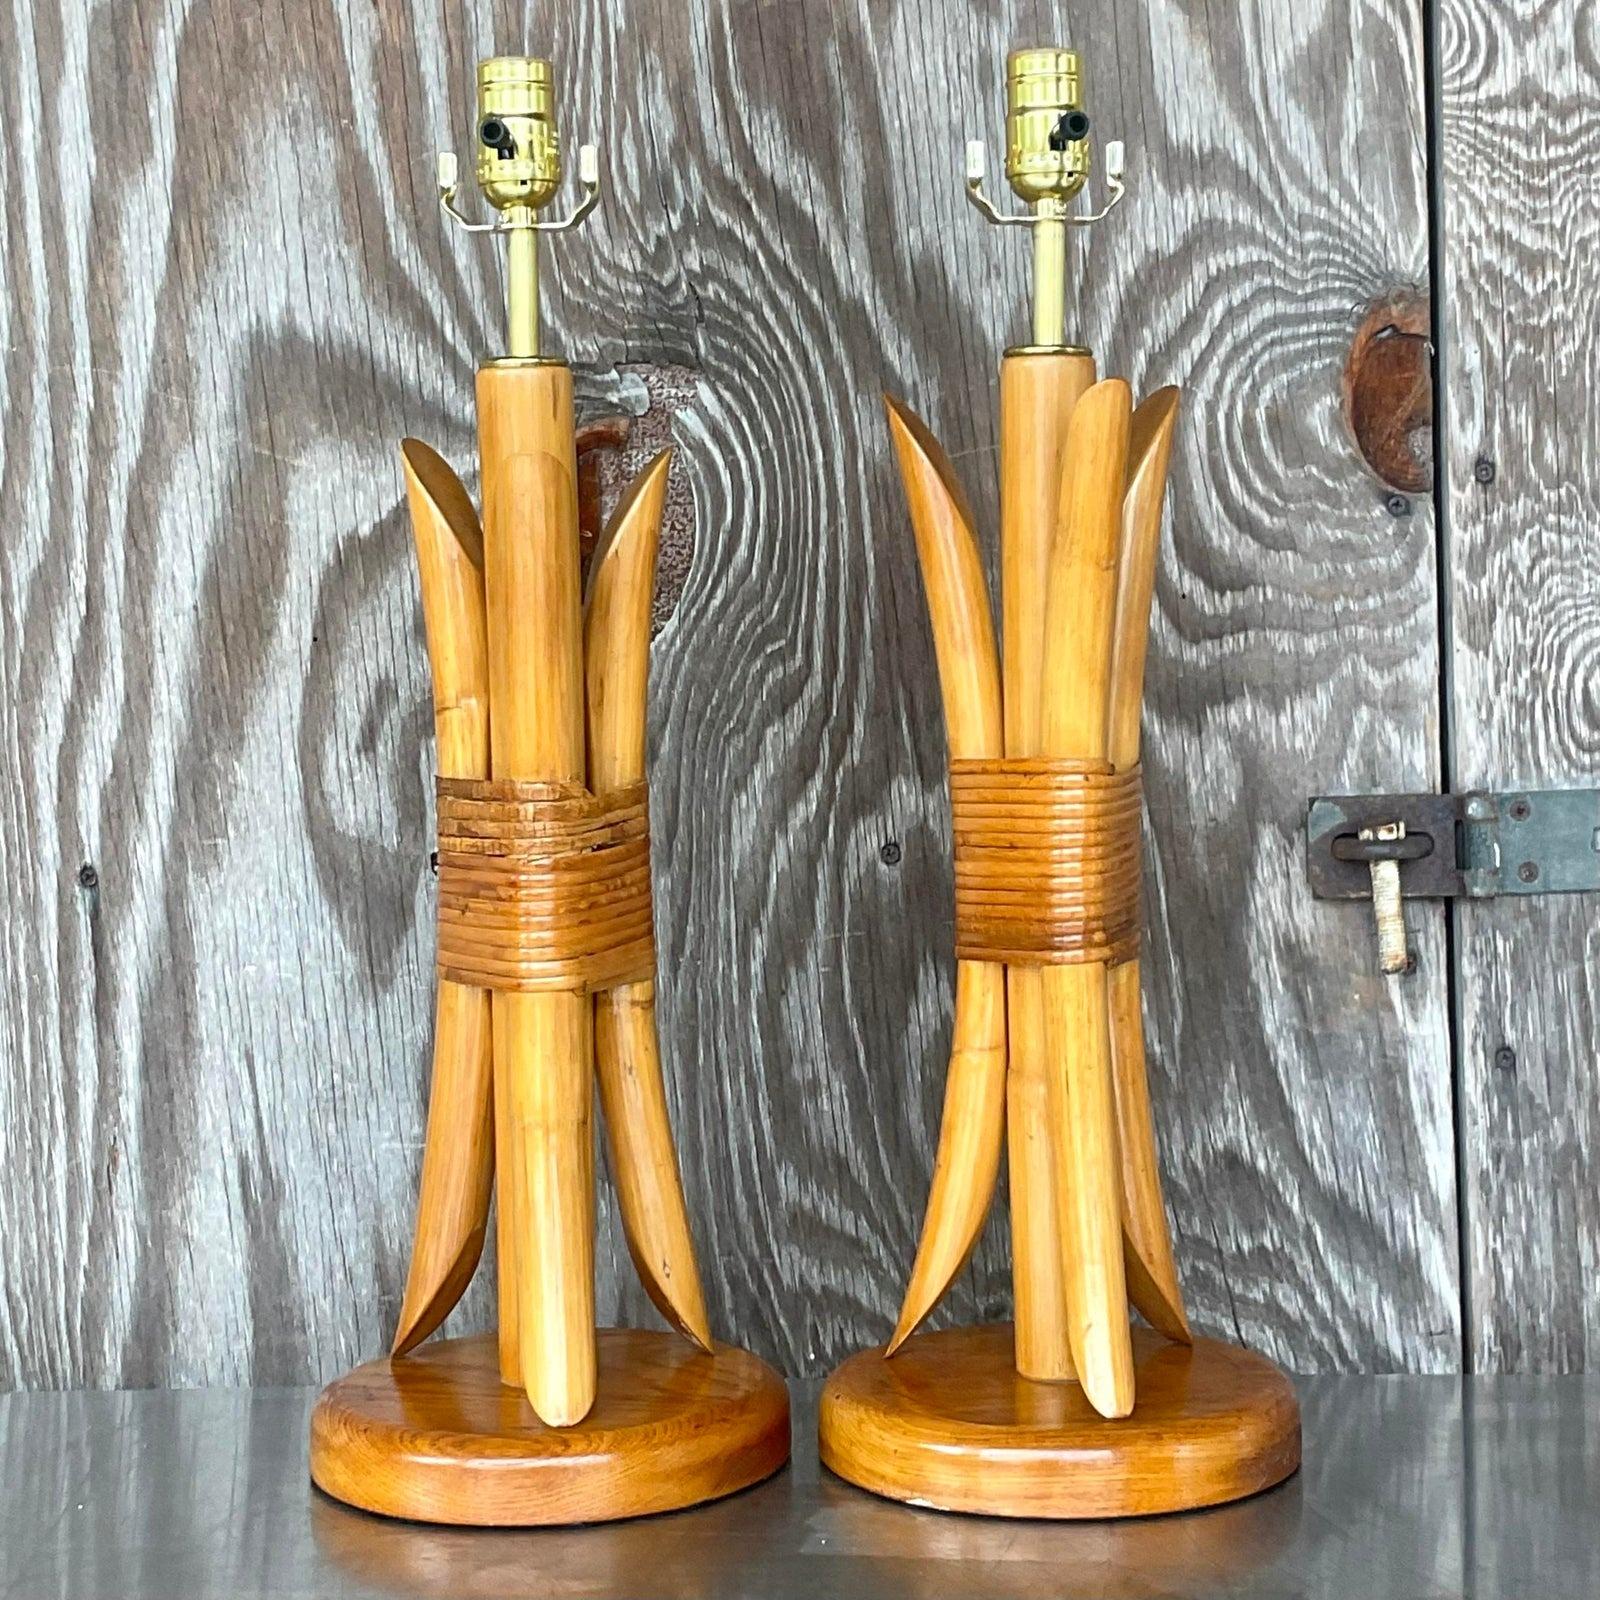 Philippine Vintage Coastal Wrapped Rattan Table Lamps - a Pair For Sale